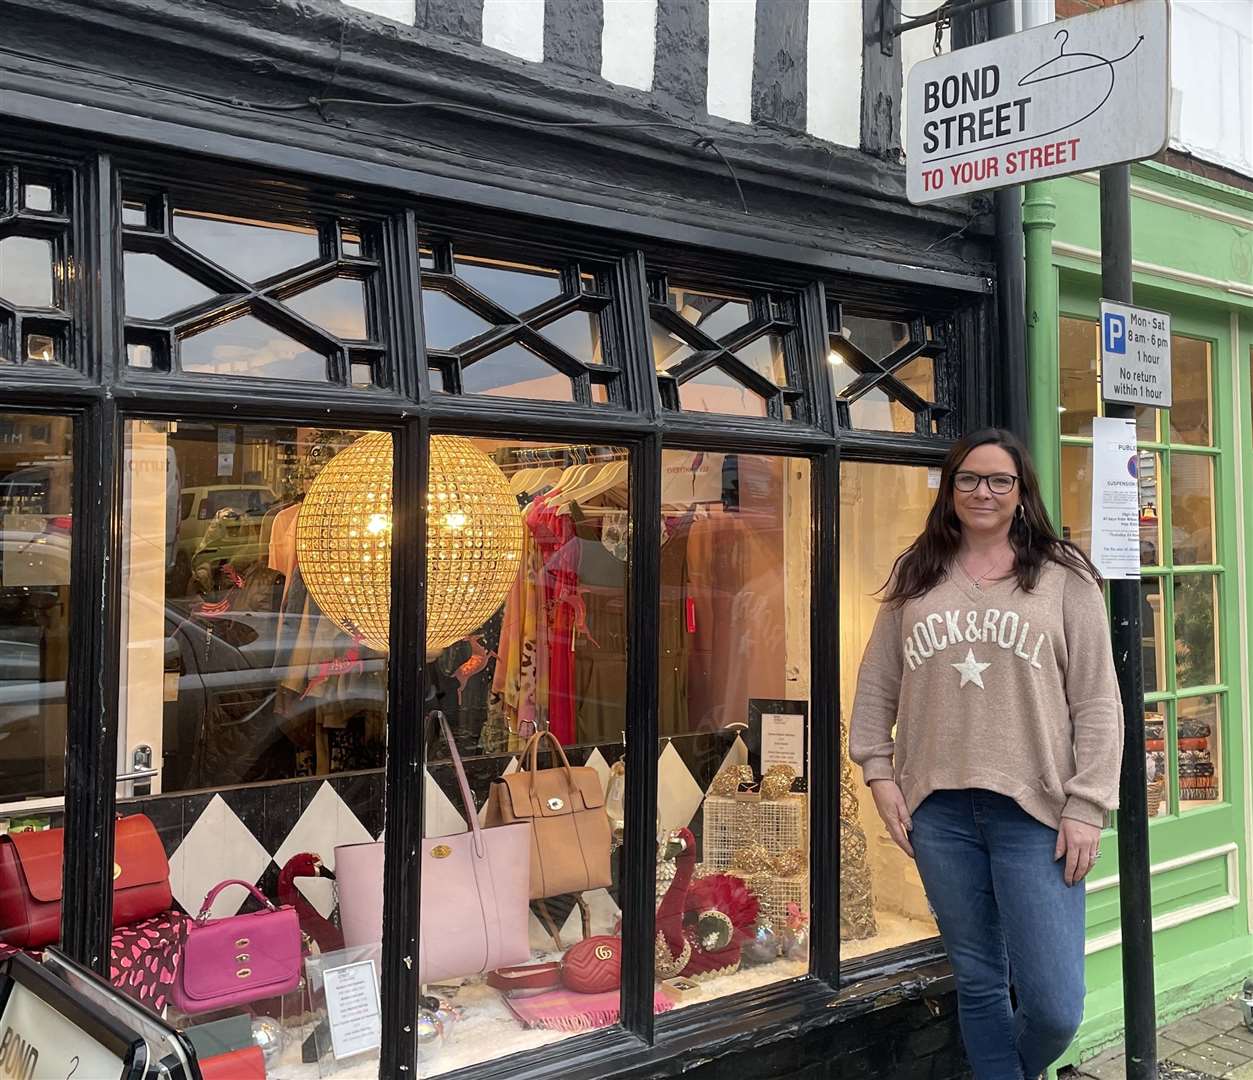 Bond Street to Your Street owner Emma Pinfold has spoken out against the lack of police presence in Tenterden